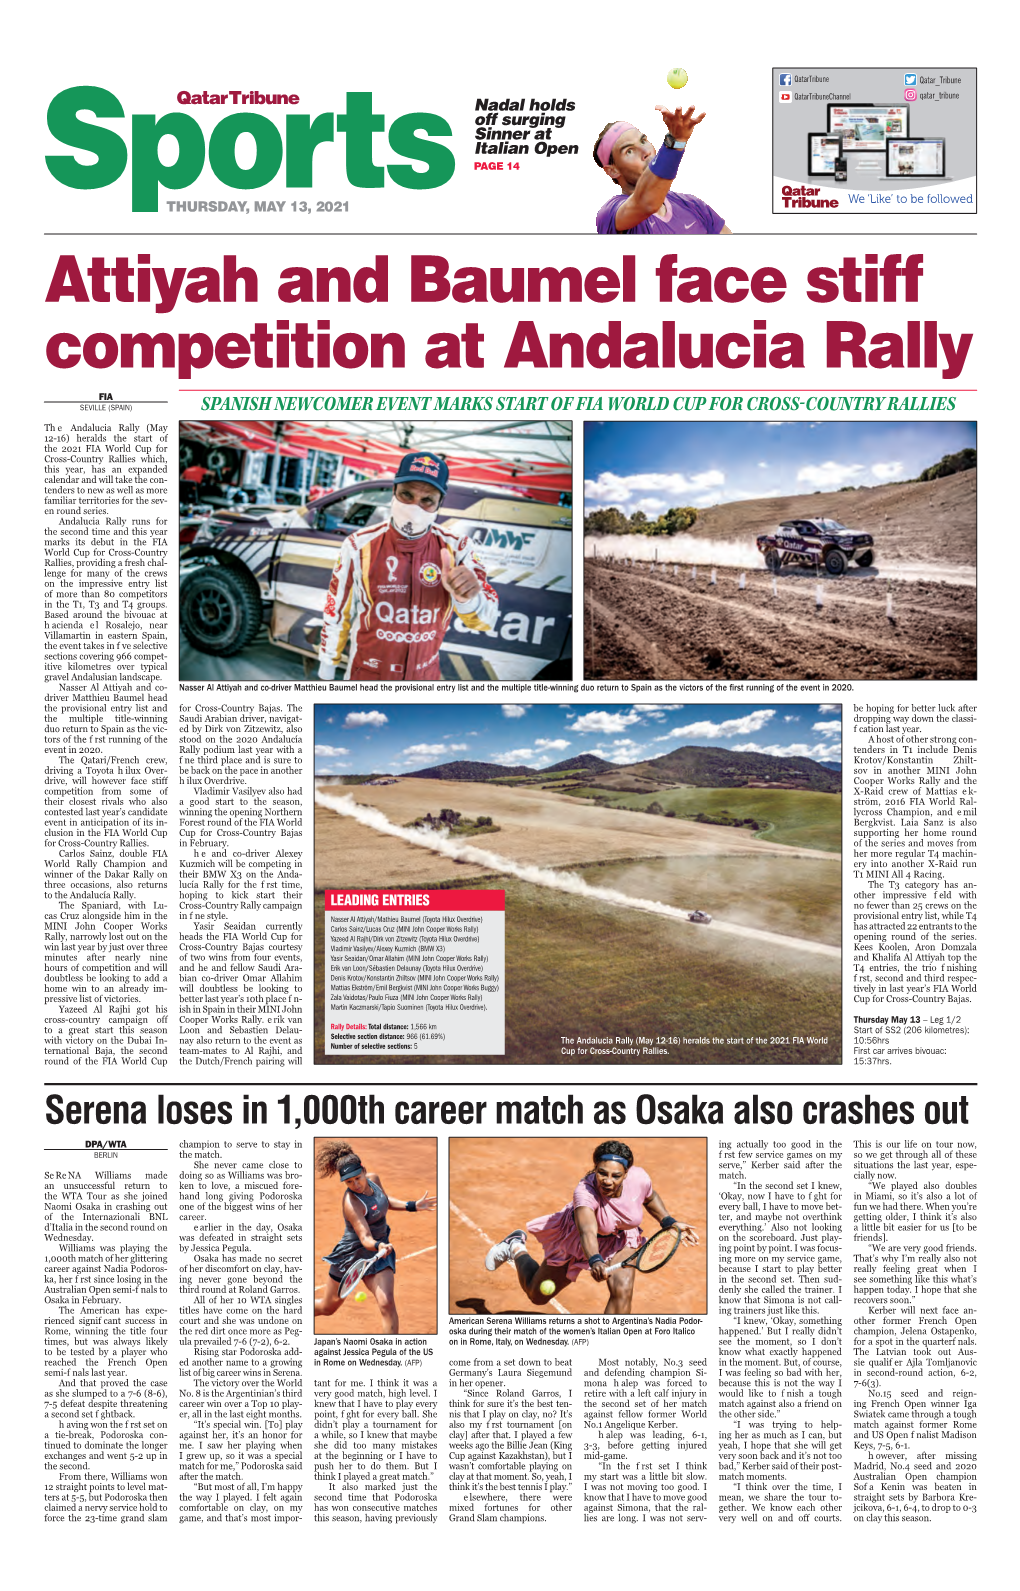 Attiyah and Baumel Face Stiff Competition at Andalucia Rally